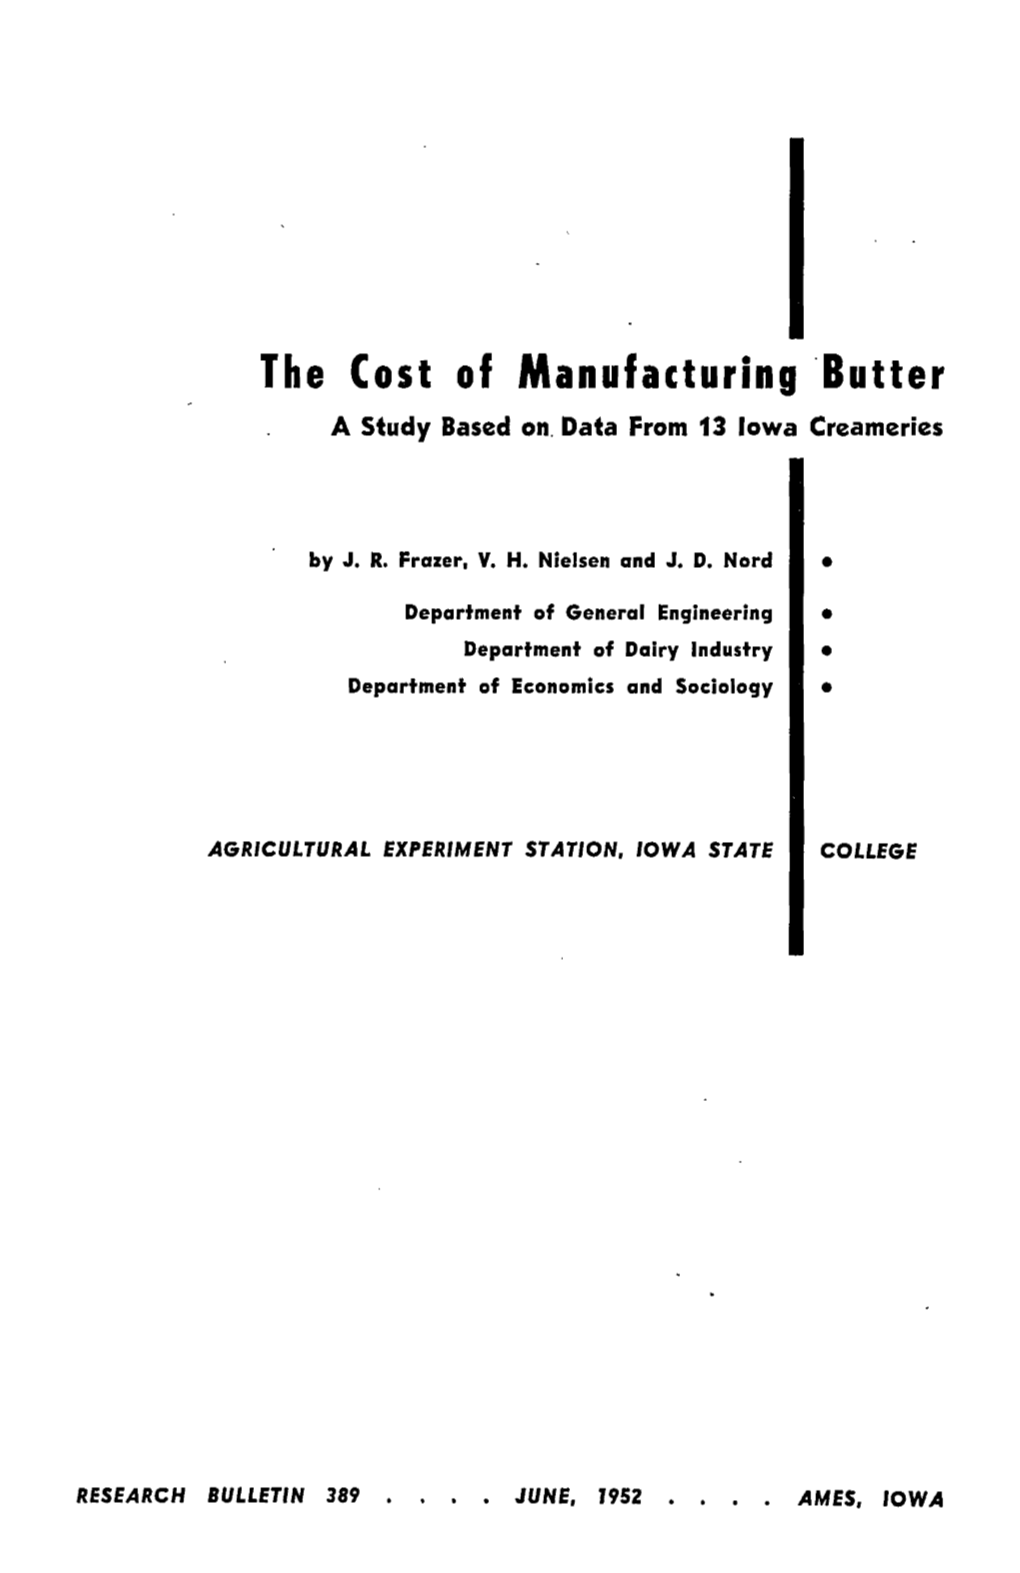 The Cost of Manufacturing 'Butter a Study Based On